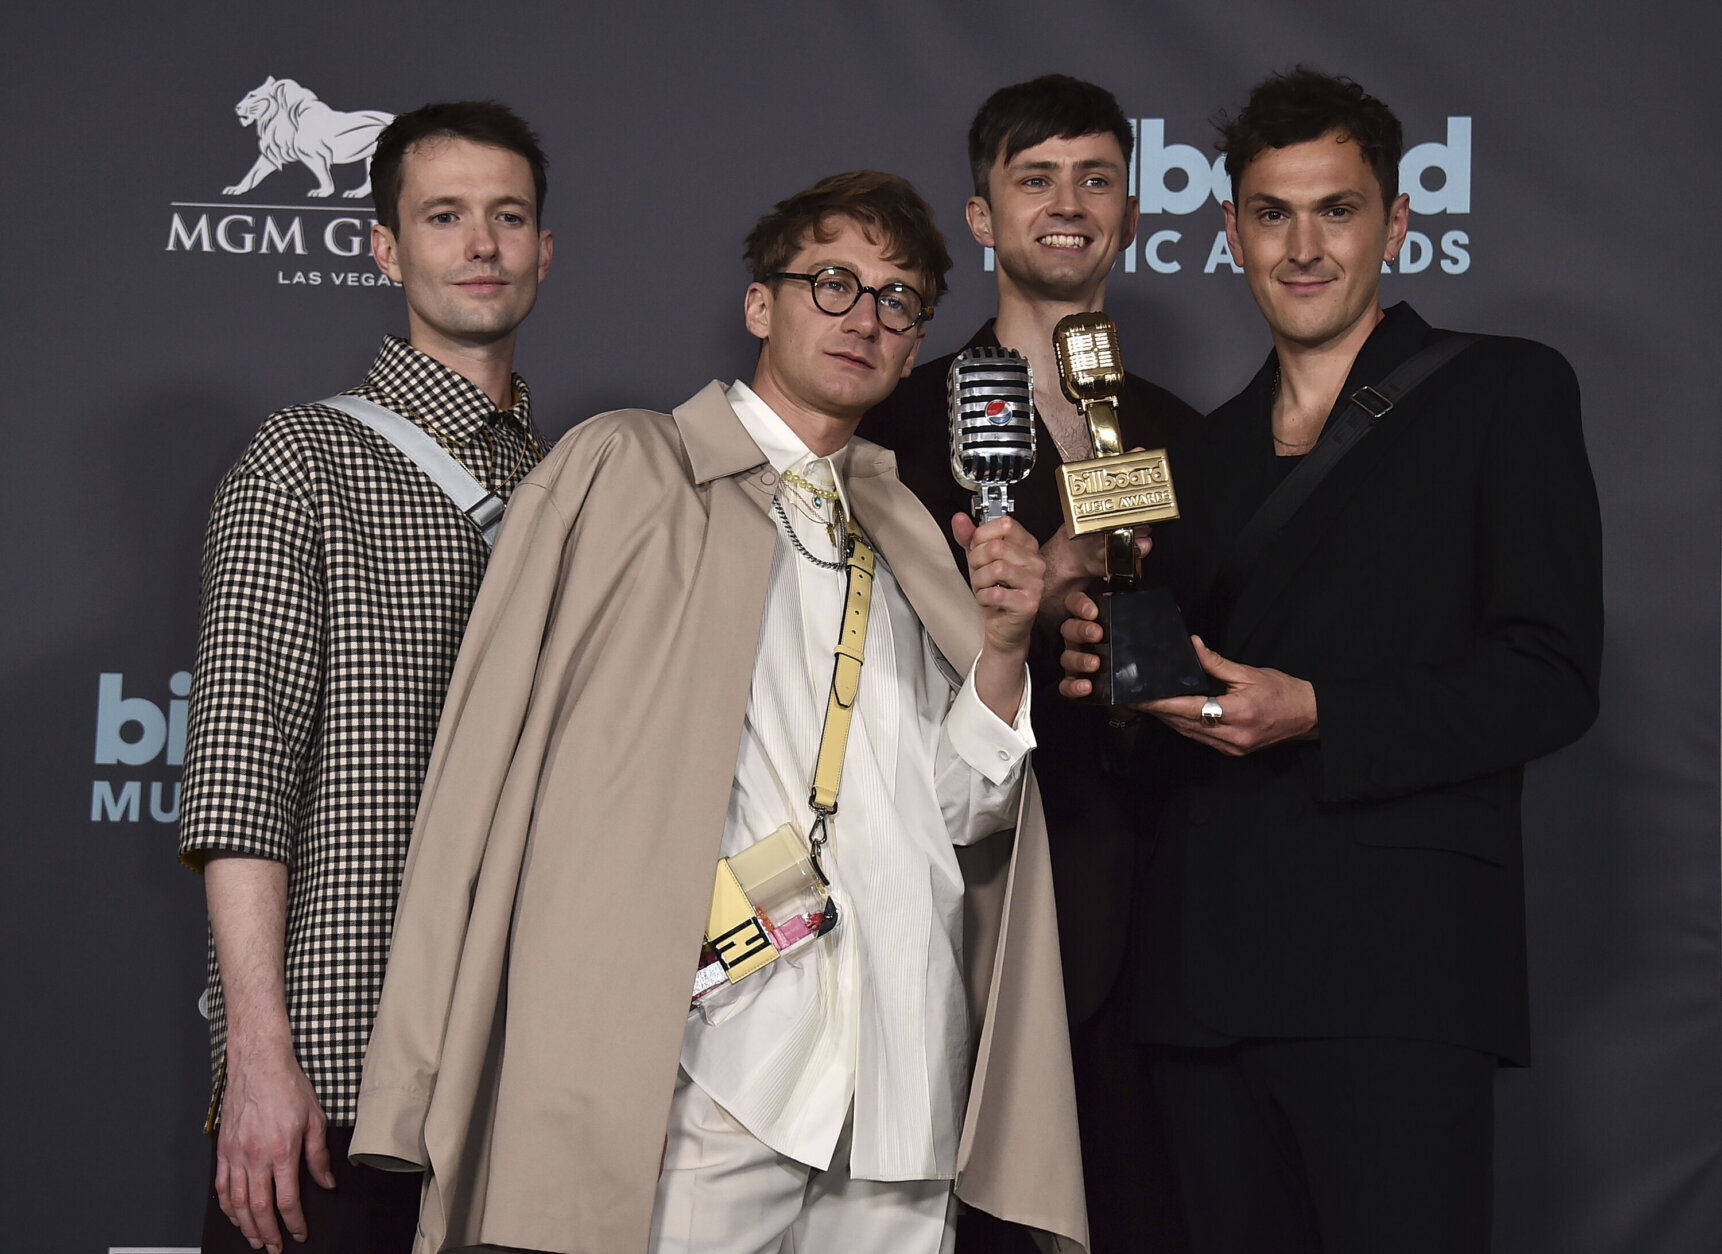 Drew MacFarlane, from left, Dave Bayley, Edmund Irwin-Singer and Joe Seaward of Glass Animals pose in the press room with the award for top rock artist and the Pepsi mic drop award at the Billboard Music Awards on Sunday, May 15, 2022, at the MGM Grand Garden Arena in Las Vegas. (Photo by Jordan Strauss/Invision/AP)